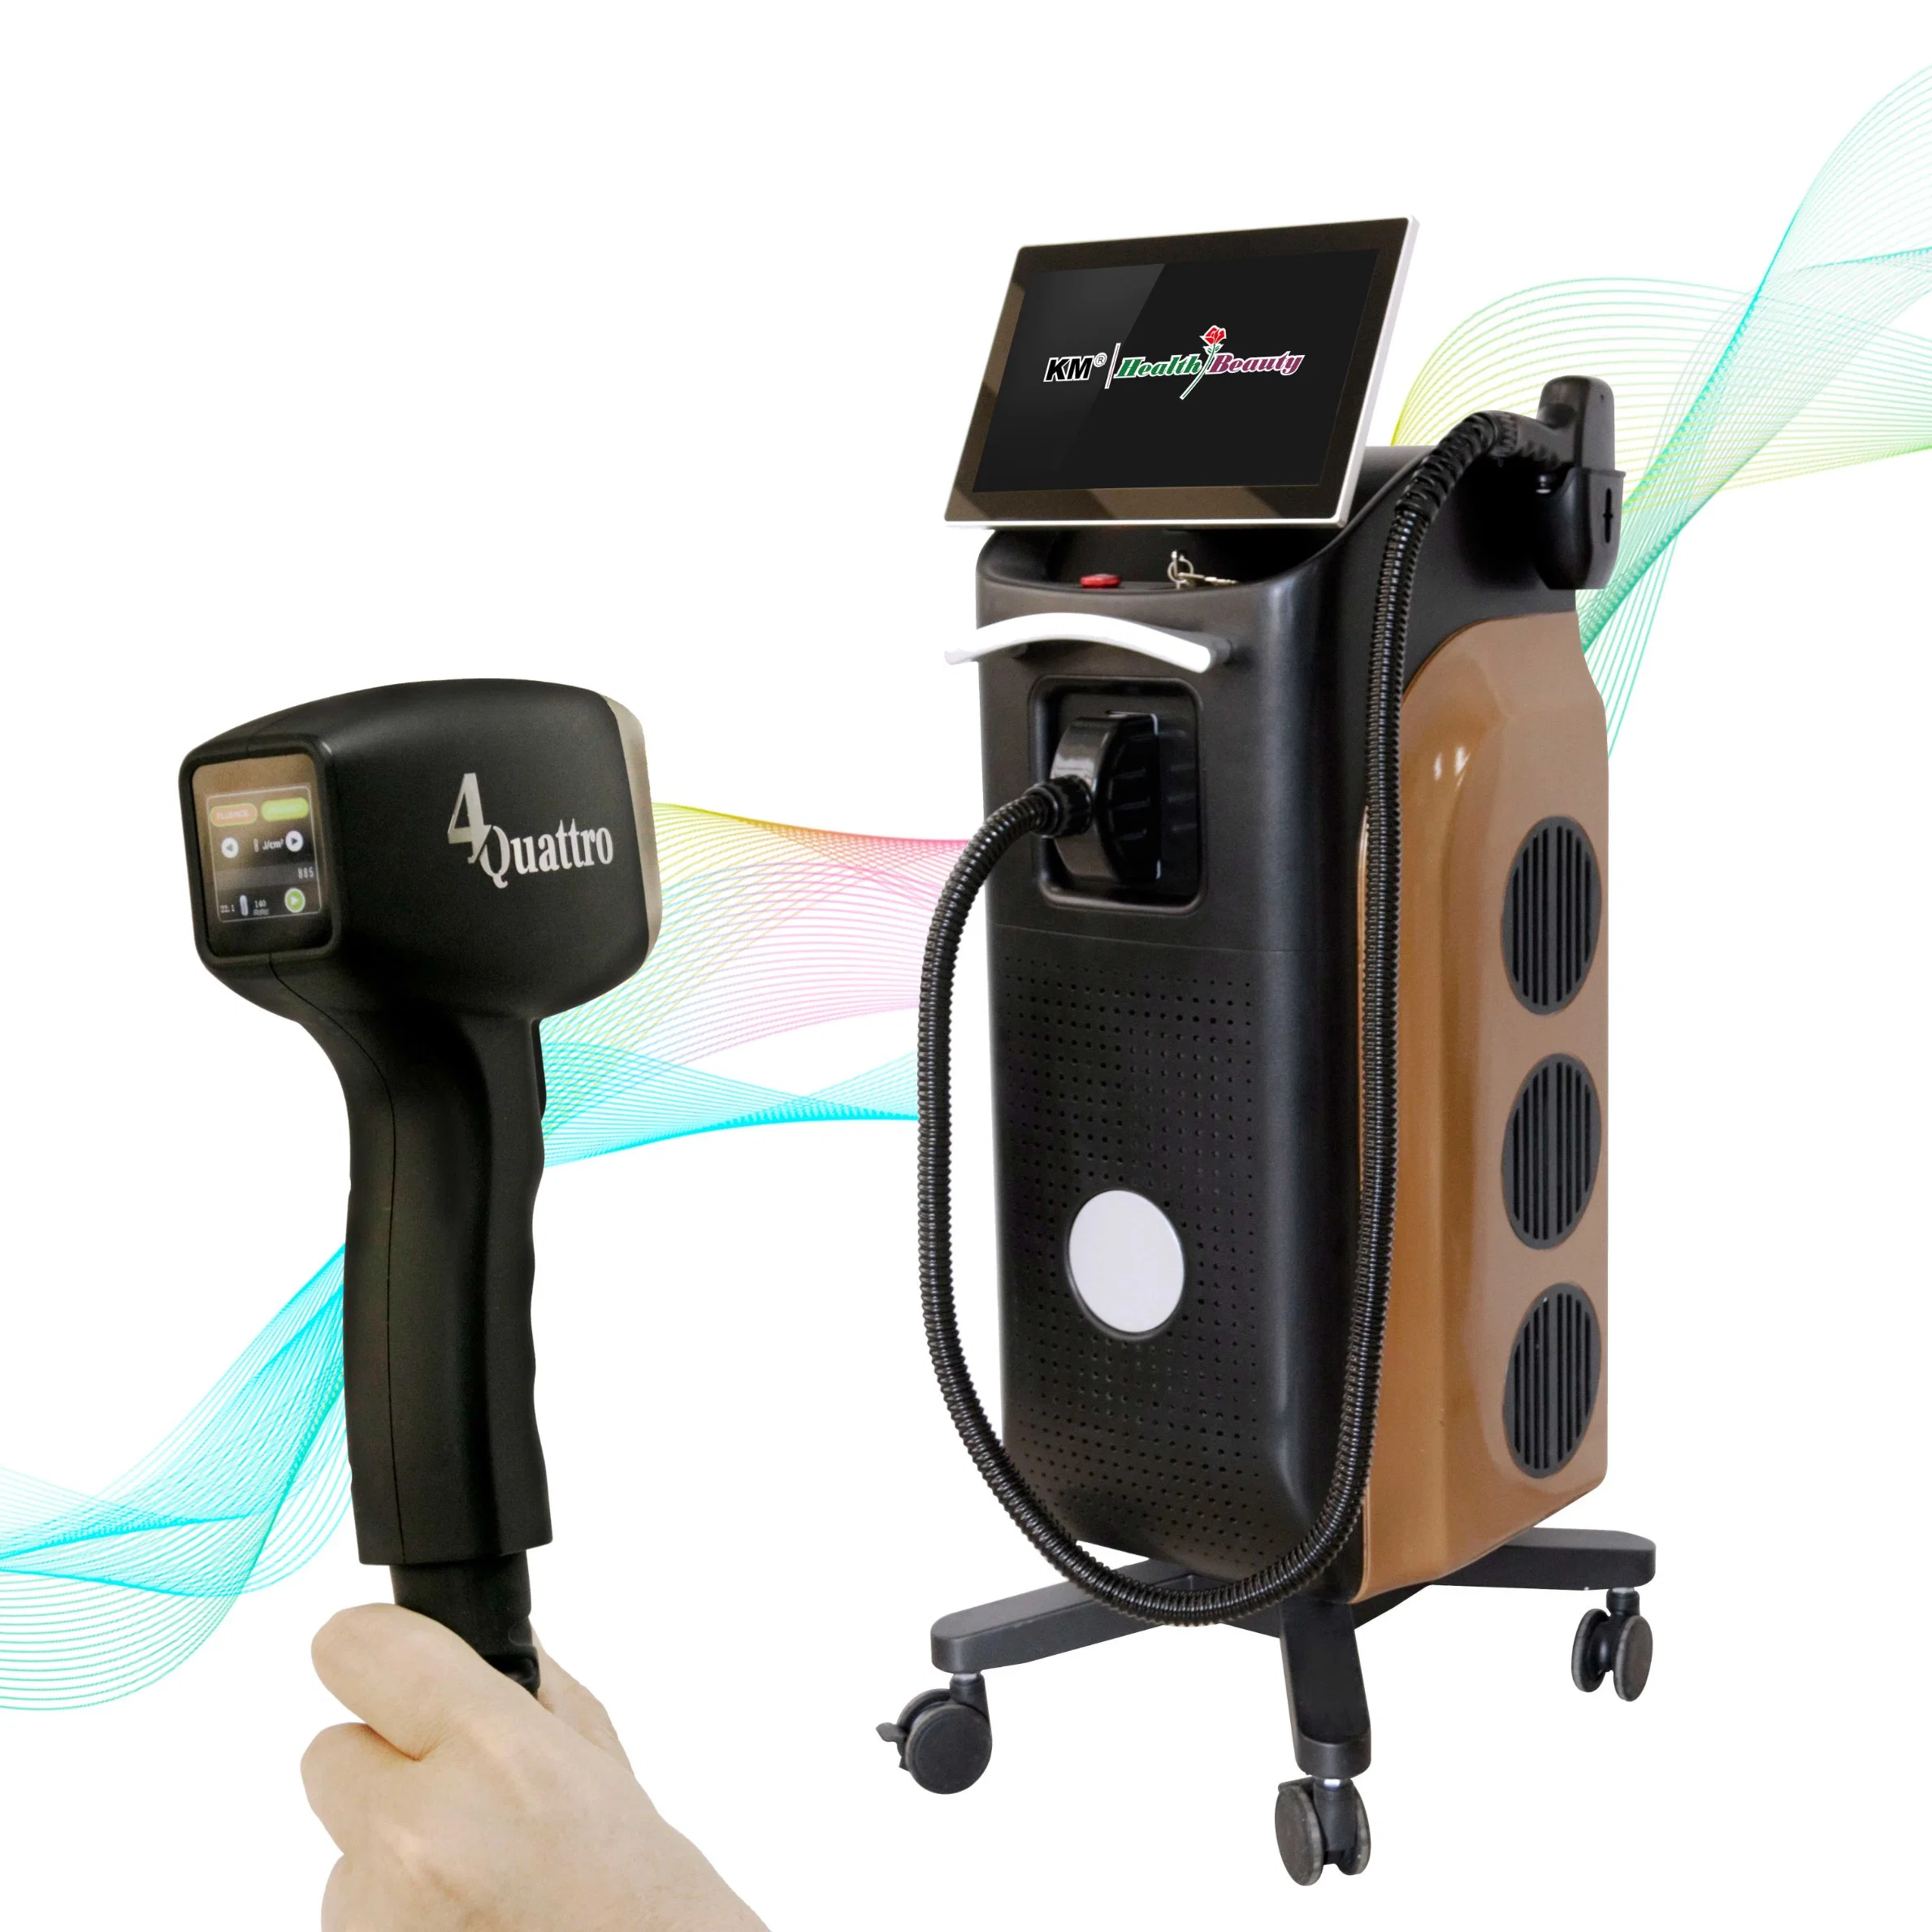 Weifang Km Laiser 808nm Diode Laser Ice 808 Nm Hair Removal Titanium 3 Wavelengths Diode Laser Beauty Salon Equipment